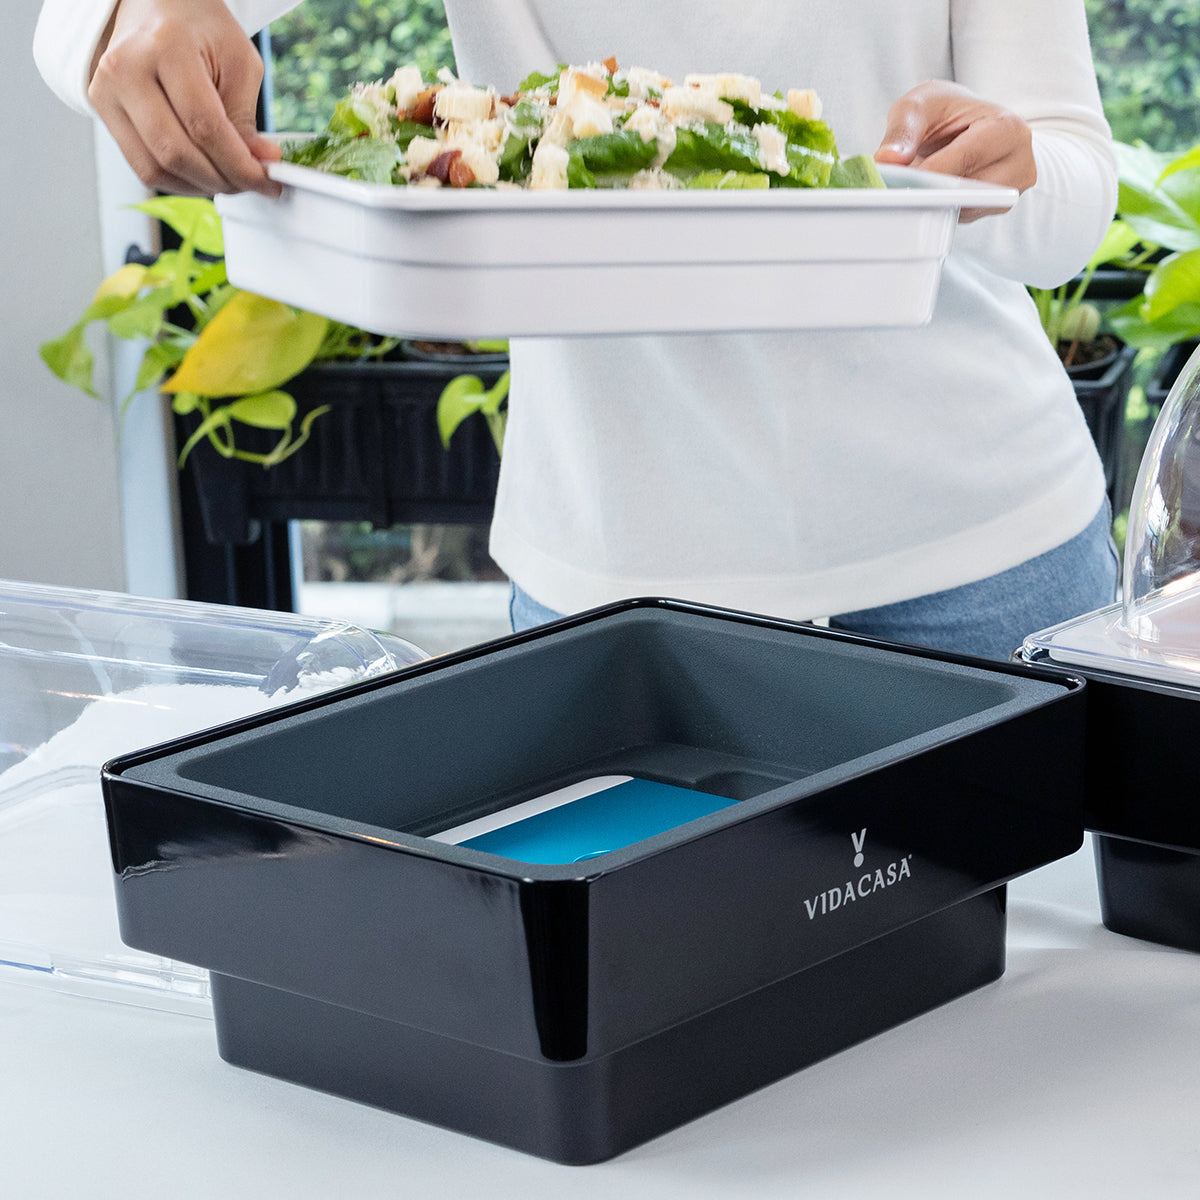 Today's most versatile gastronorm sizing buffetware equipment that can keep cold foods fresh at 4ºC (39ºF) without wet ice, or cooked gourmet hot at 80ºC (176ºF) without dangling cords or chafing fuels. 